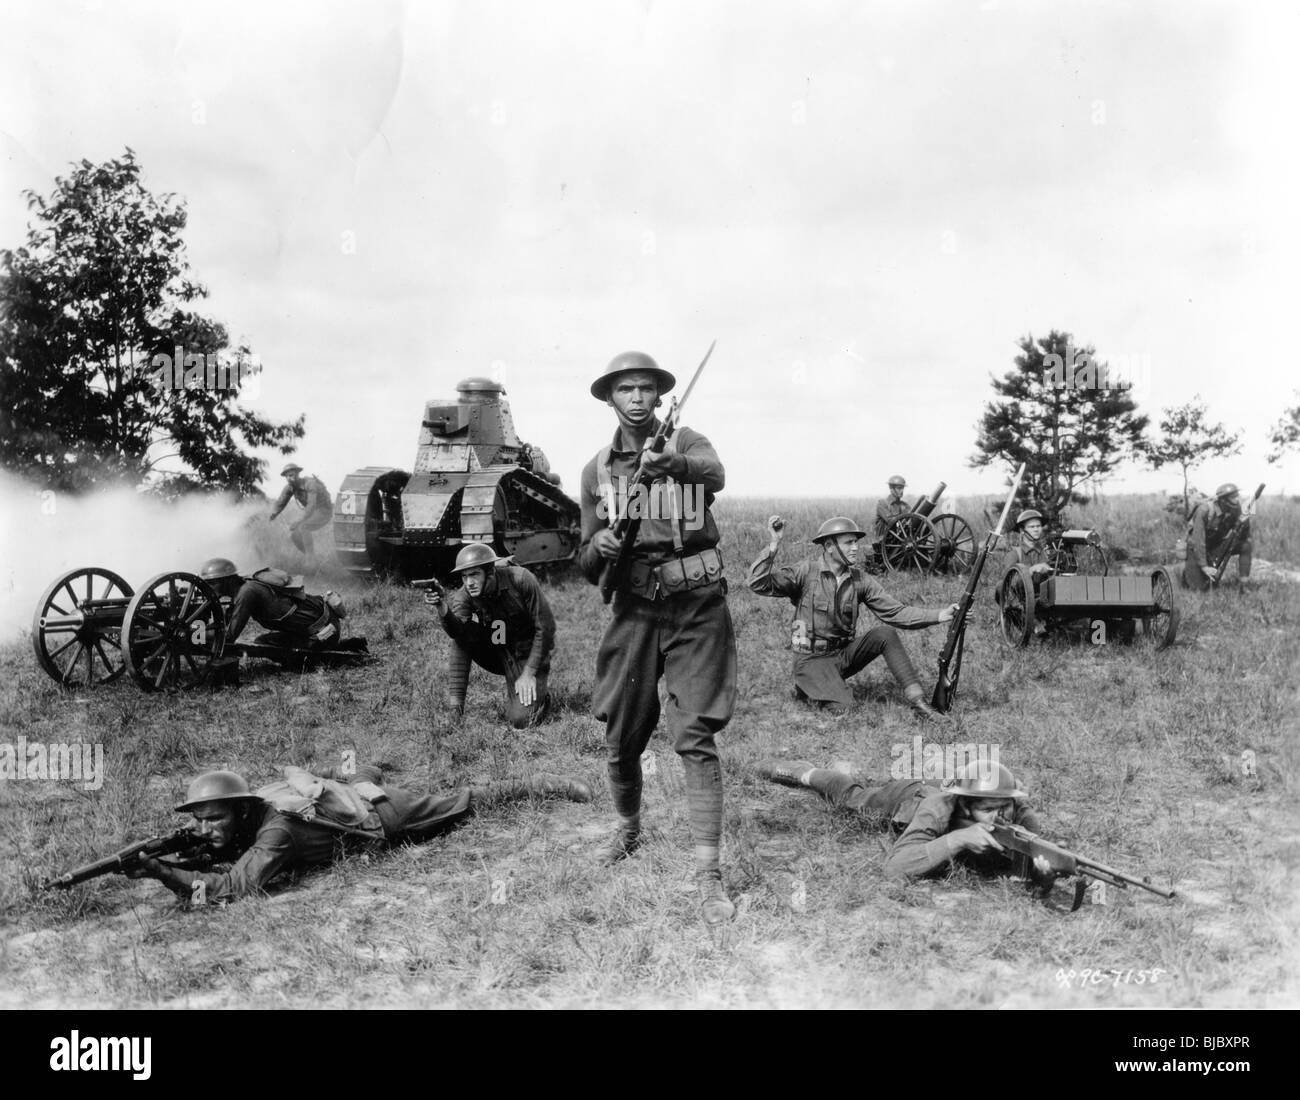 United States Army recruiting photo from 1930. soldiers bayonet war tank sharpshooters military recruitment rifle surreal rifle Stock Photo